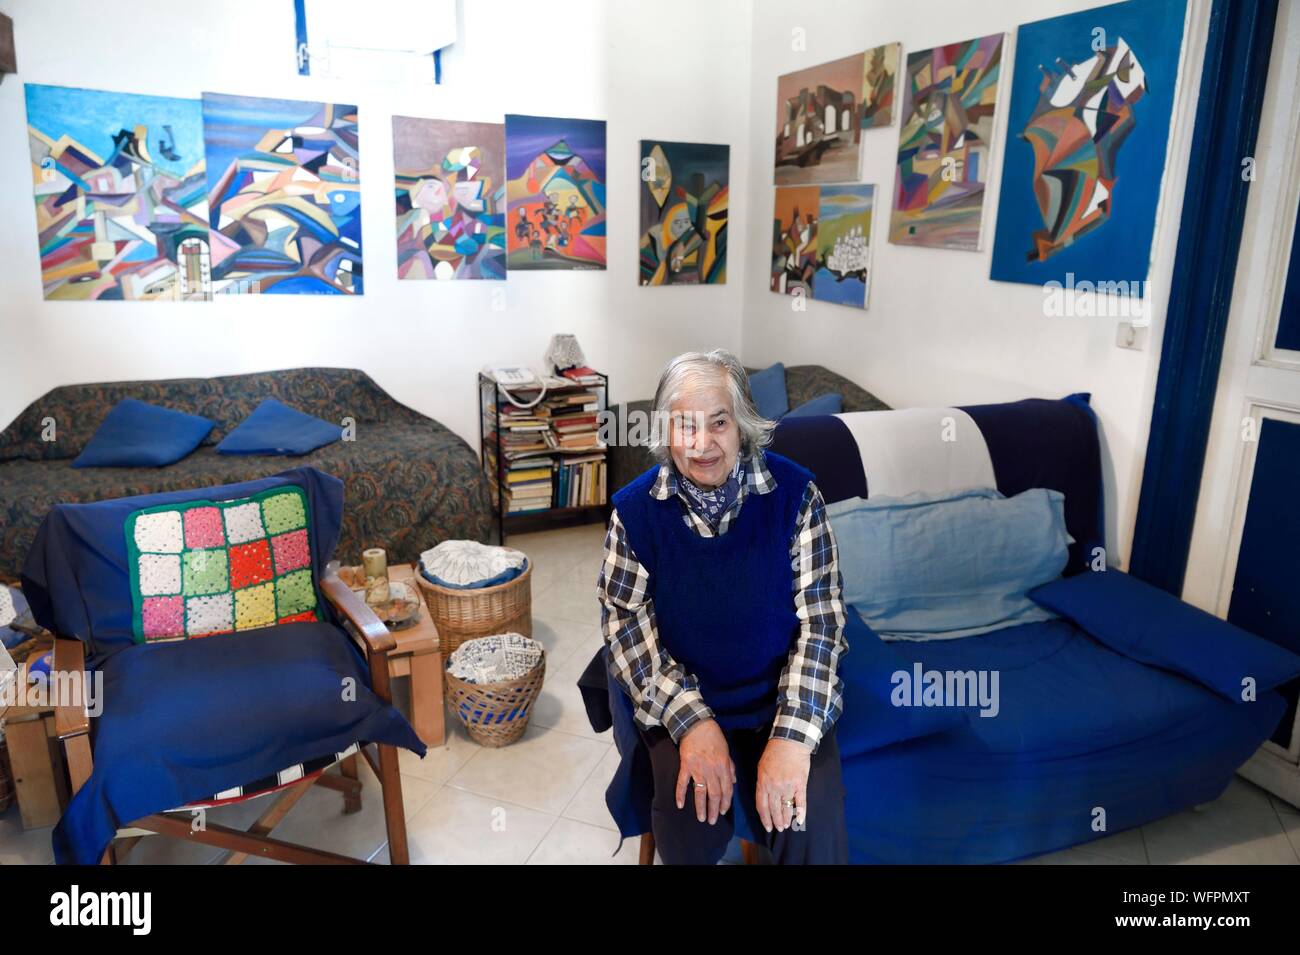 Italy, Sicily, Aeolian Islands, listed as World Heritage by UNESCO, Stromboli island, the wife of the fisherman and painter Mario Cusolito today deceased whose works can be seen in the background Stock Photo